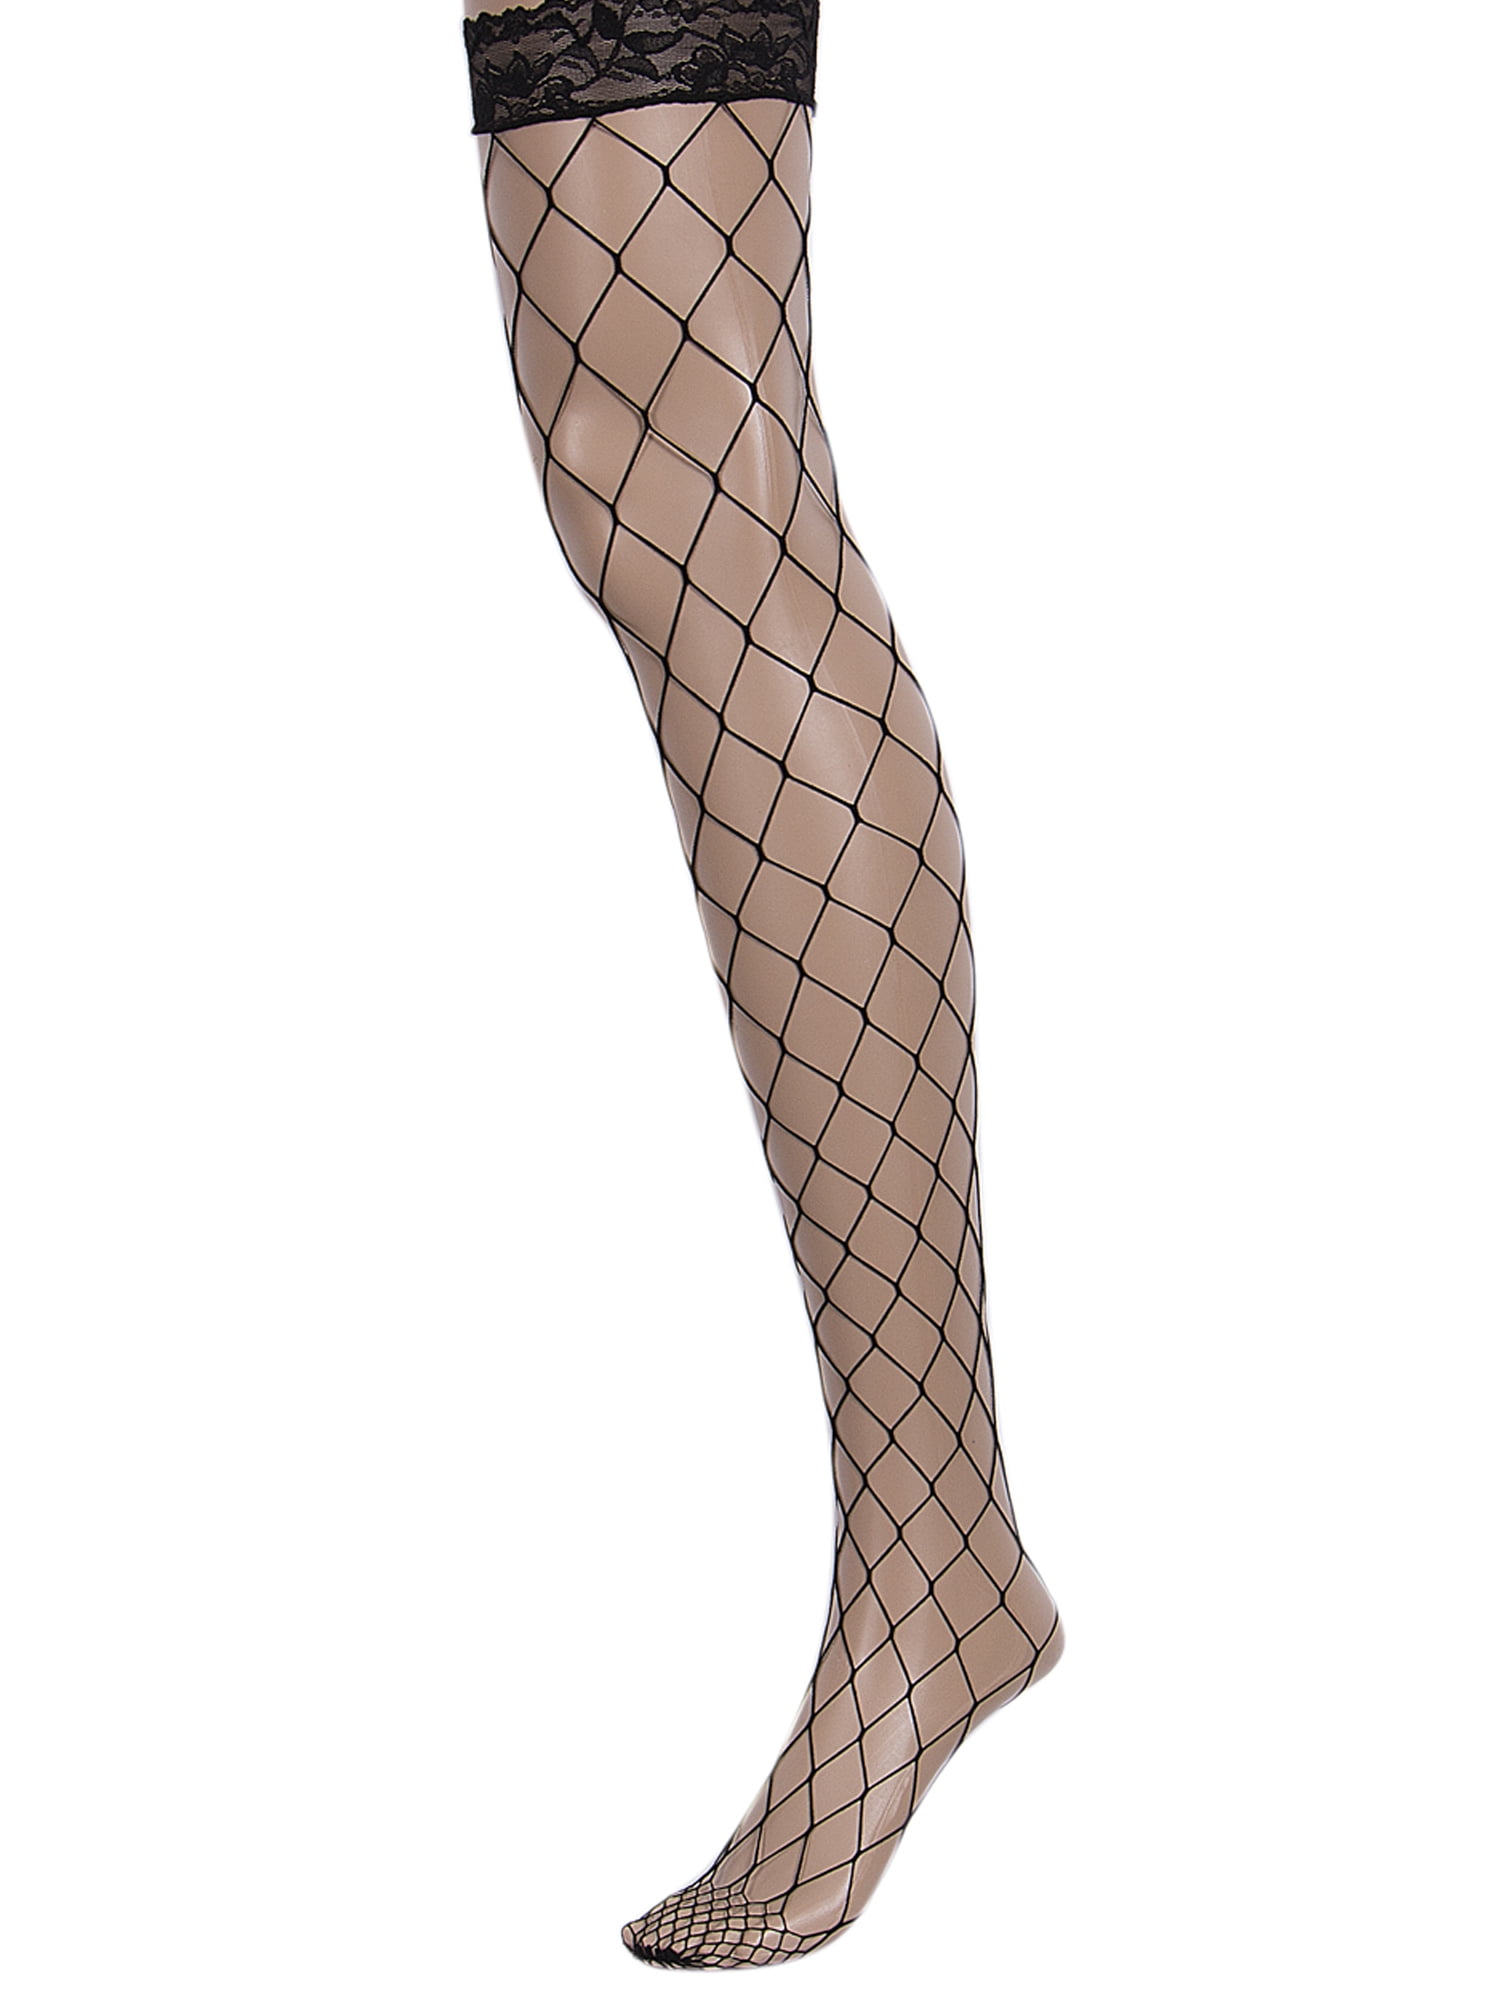 Beelittle Womens Fishnet Tights Suspender Pantyhose Thigh-High Stockings 6 pairs C 